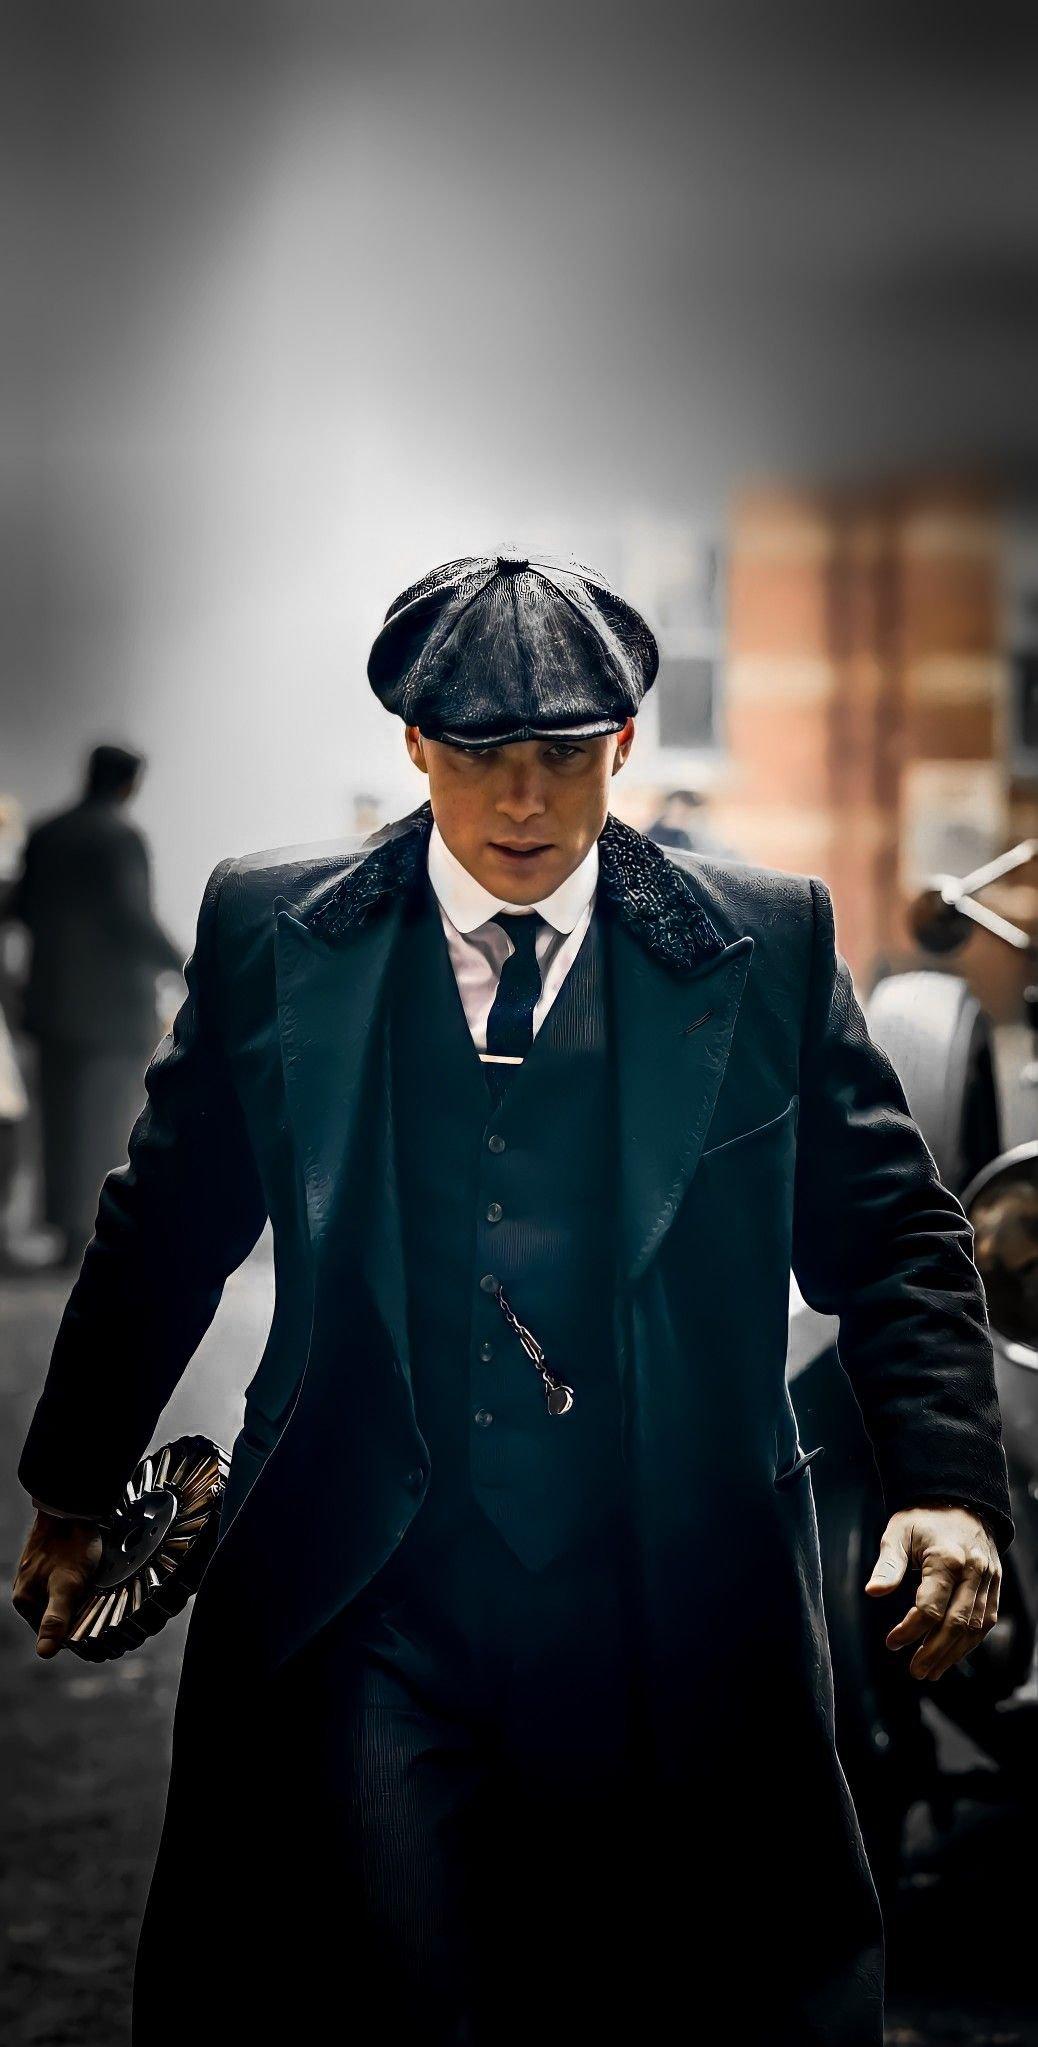 Thomas Shelby Hollywood Actor Wallpaper Mobcup